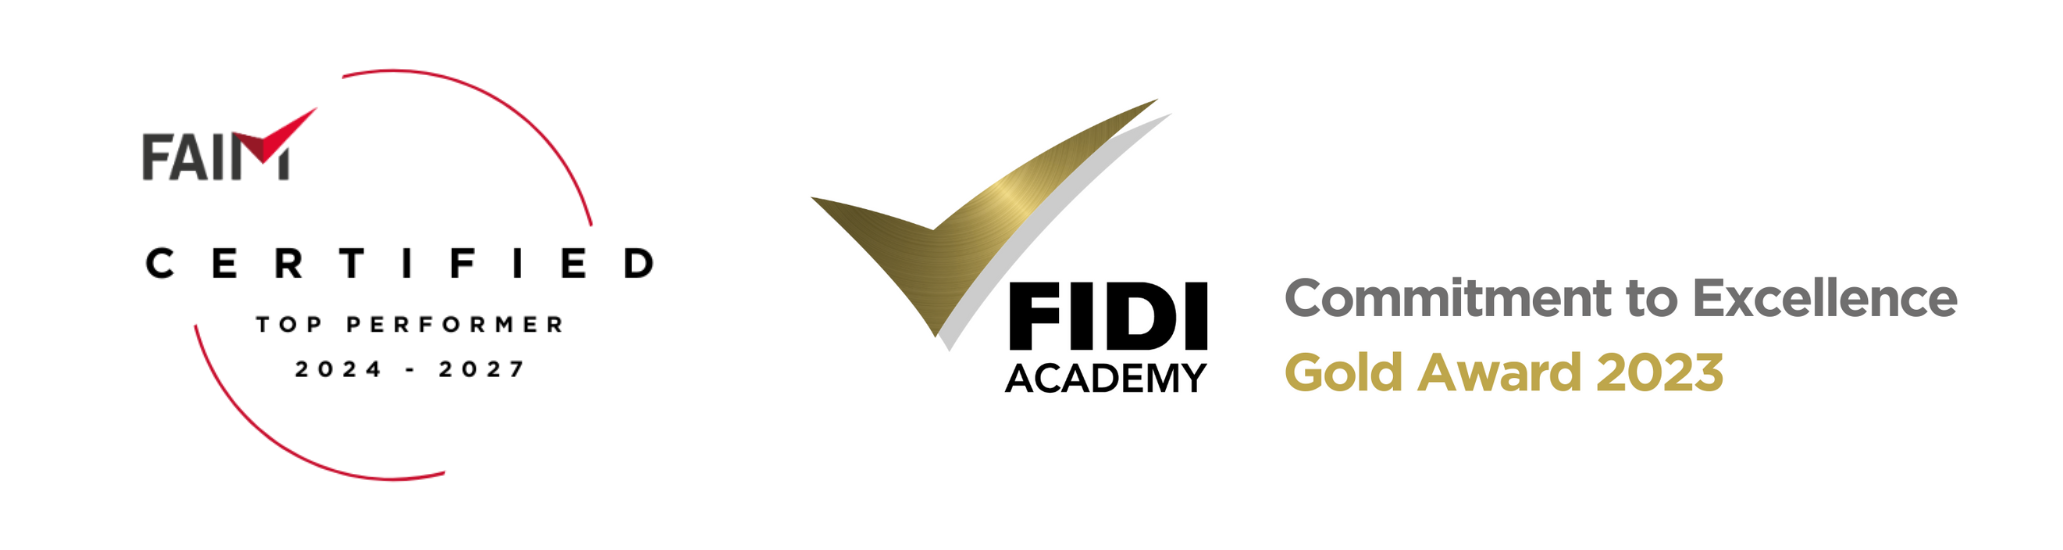 Fidi Academy Gold Award And Top Performer Certificate